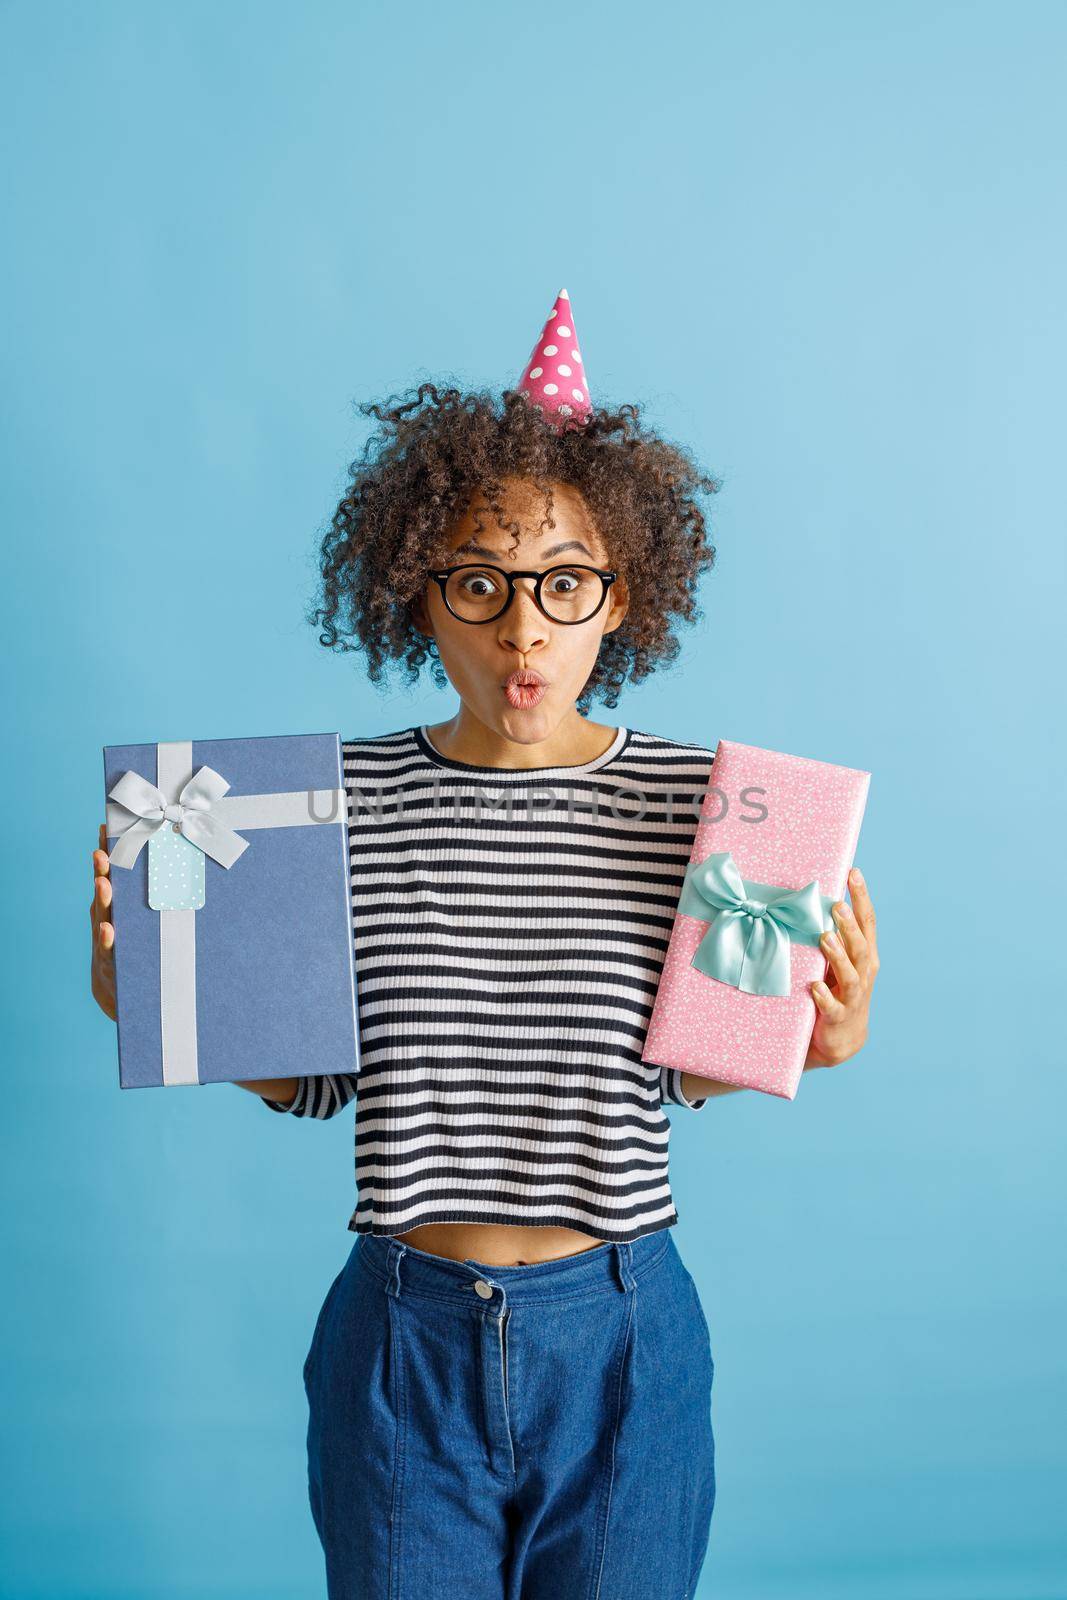 Female person in party cone hat pouting lips and making funny face while holding two wrapped gift boxes